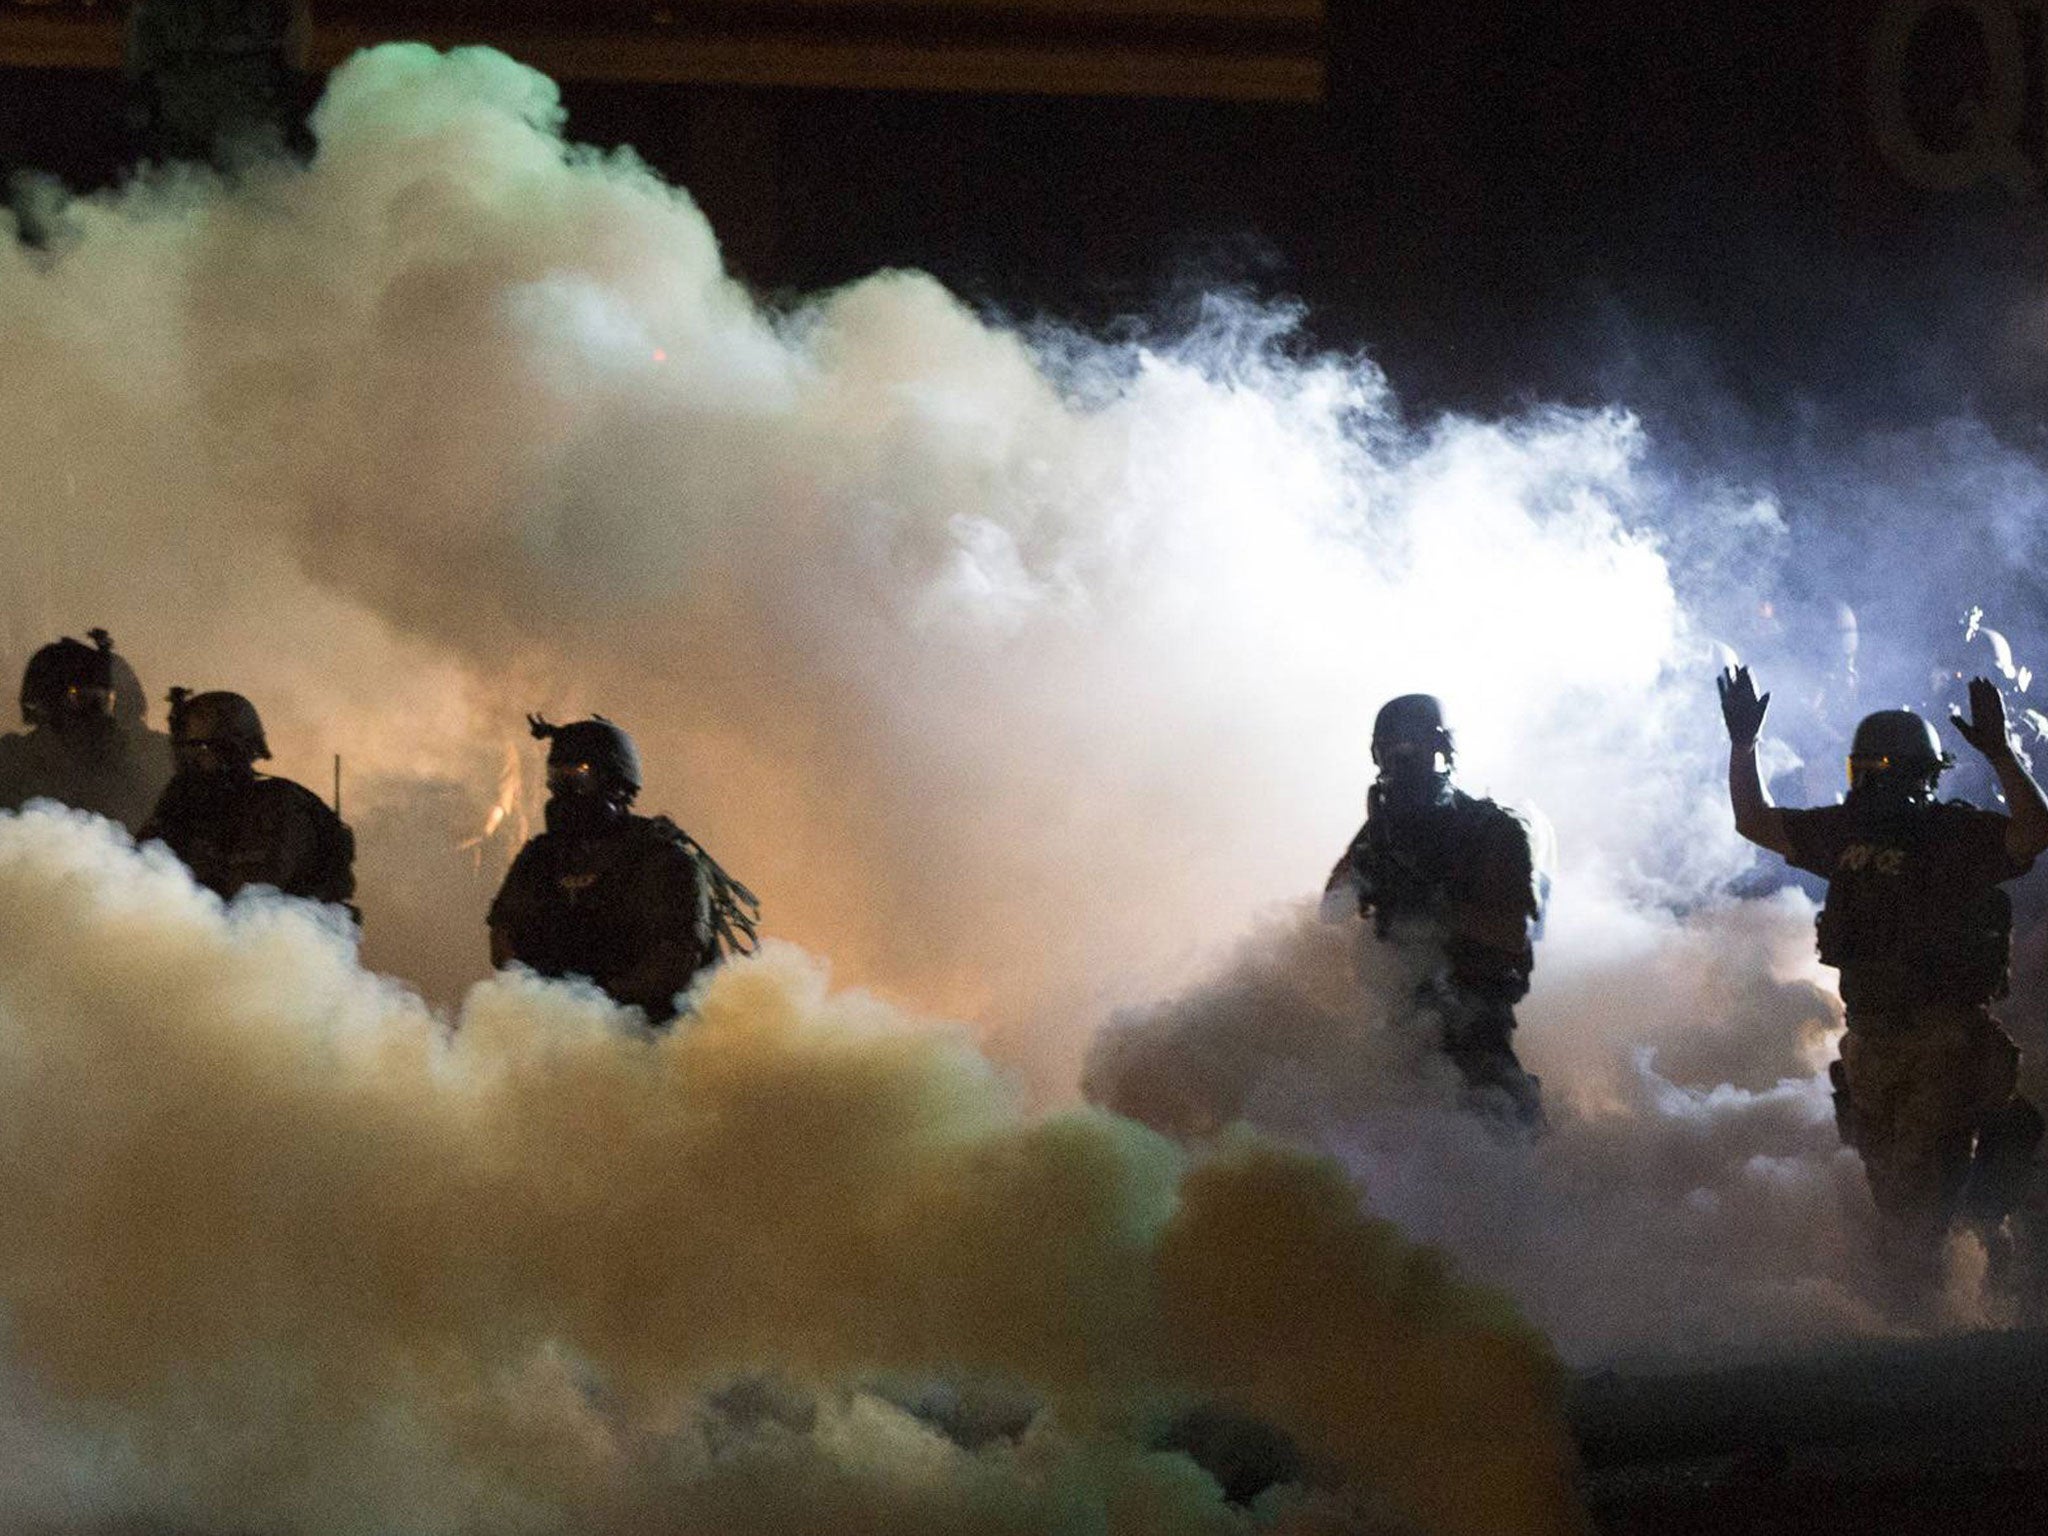 Riot police clear a street with smoke bombs while clashing with demonstrators in Ferguson, Missouri. State Senator Claire McCaskill has called for the ‘demilitarisation’ of the police response